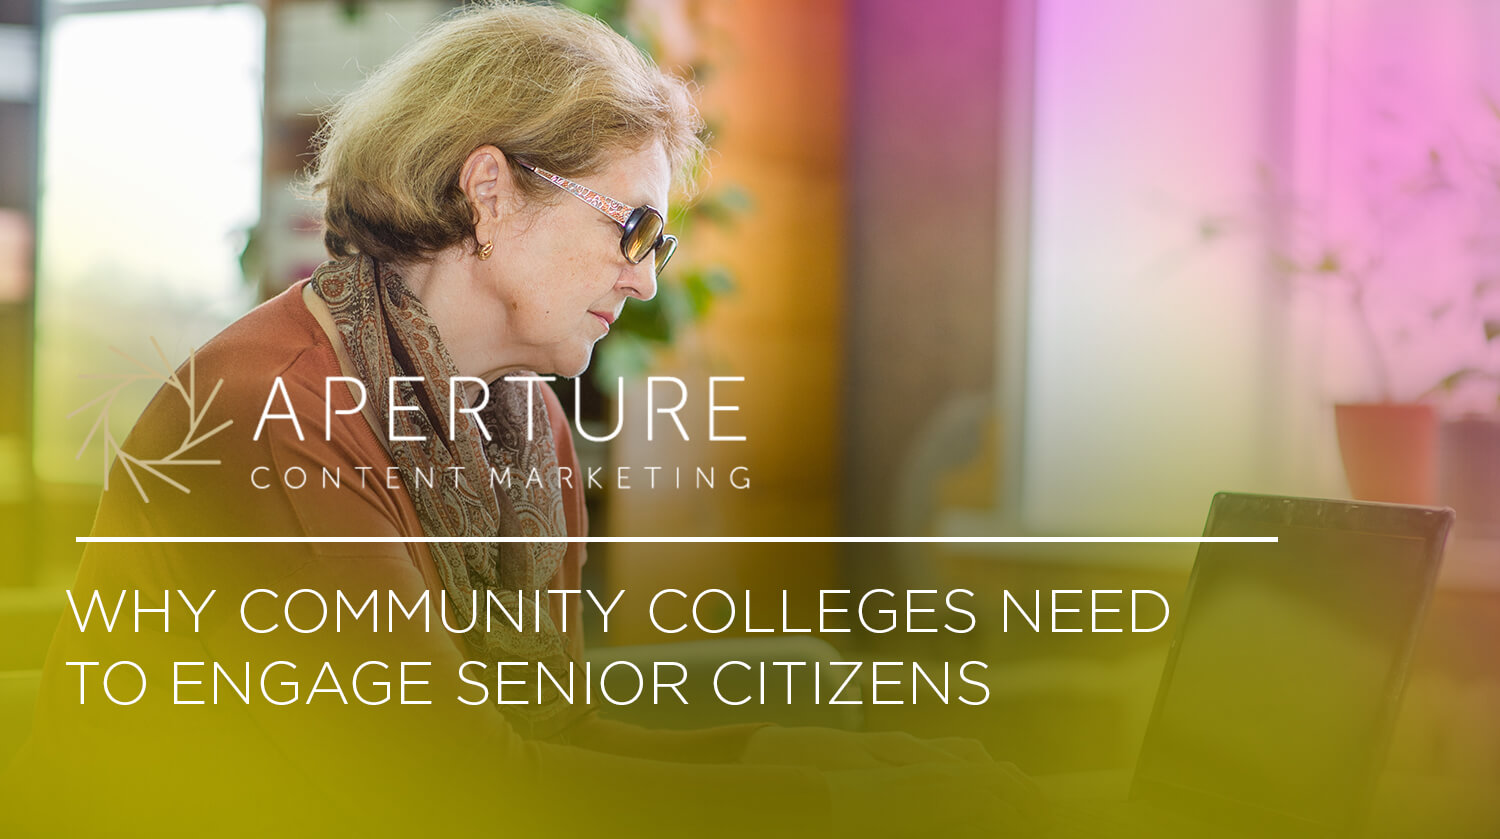 Why Community Colleges Need to Engage Senior Citizens